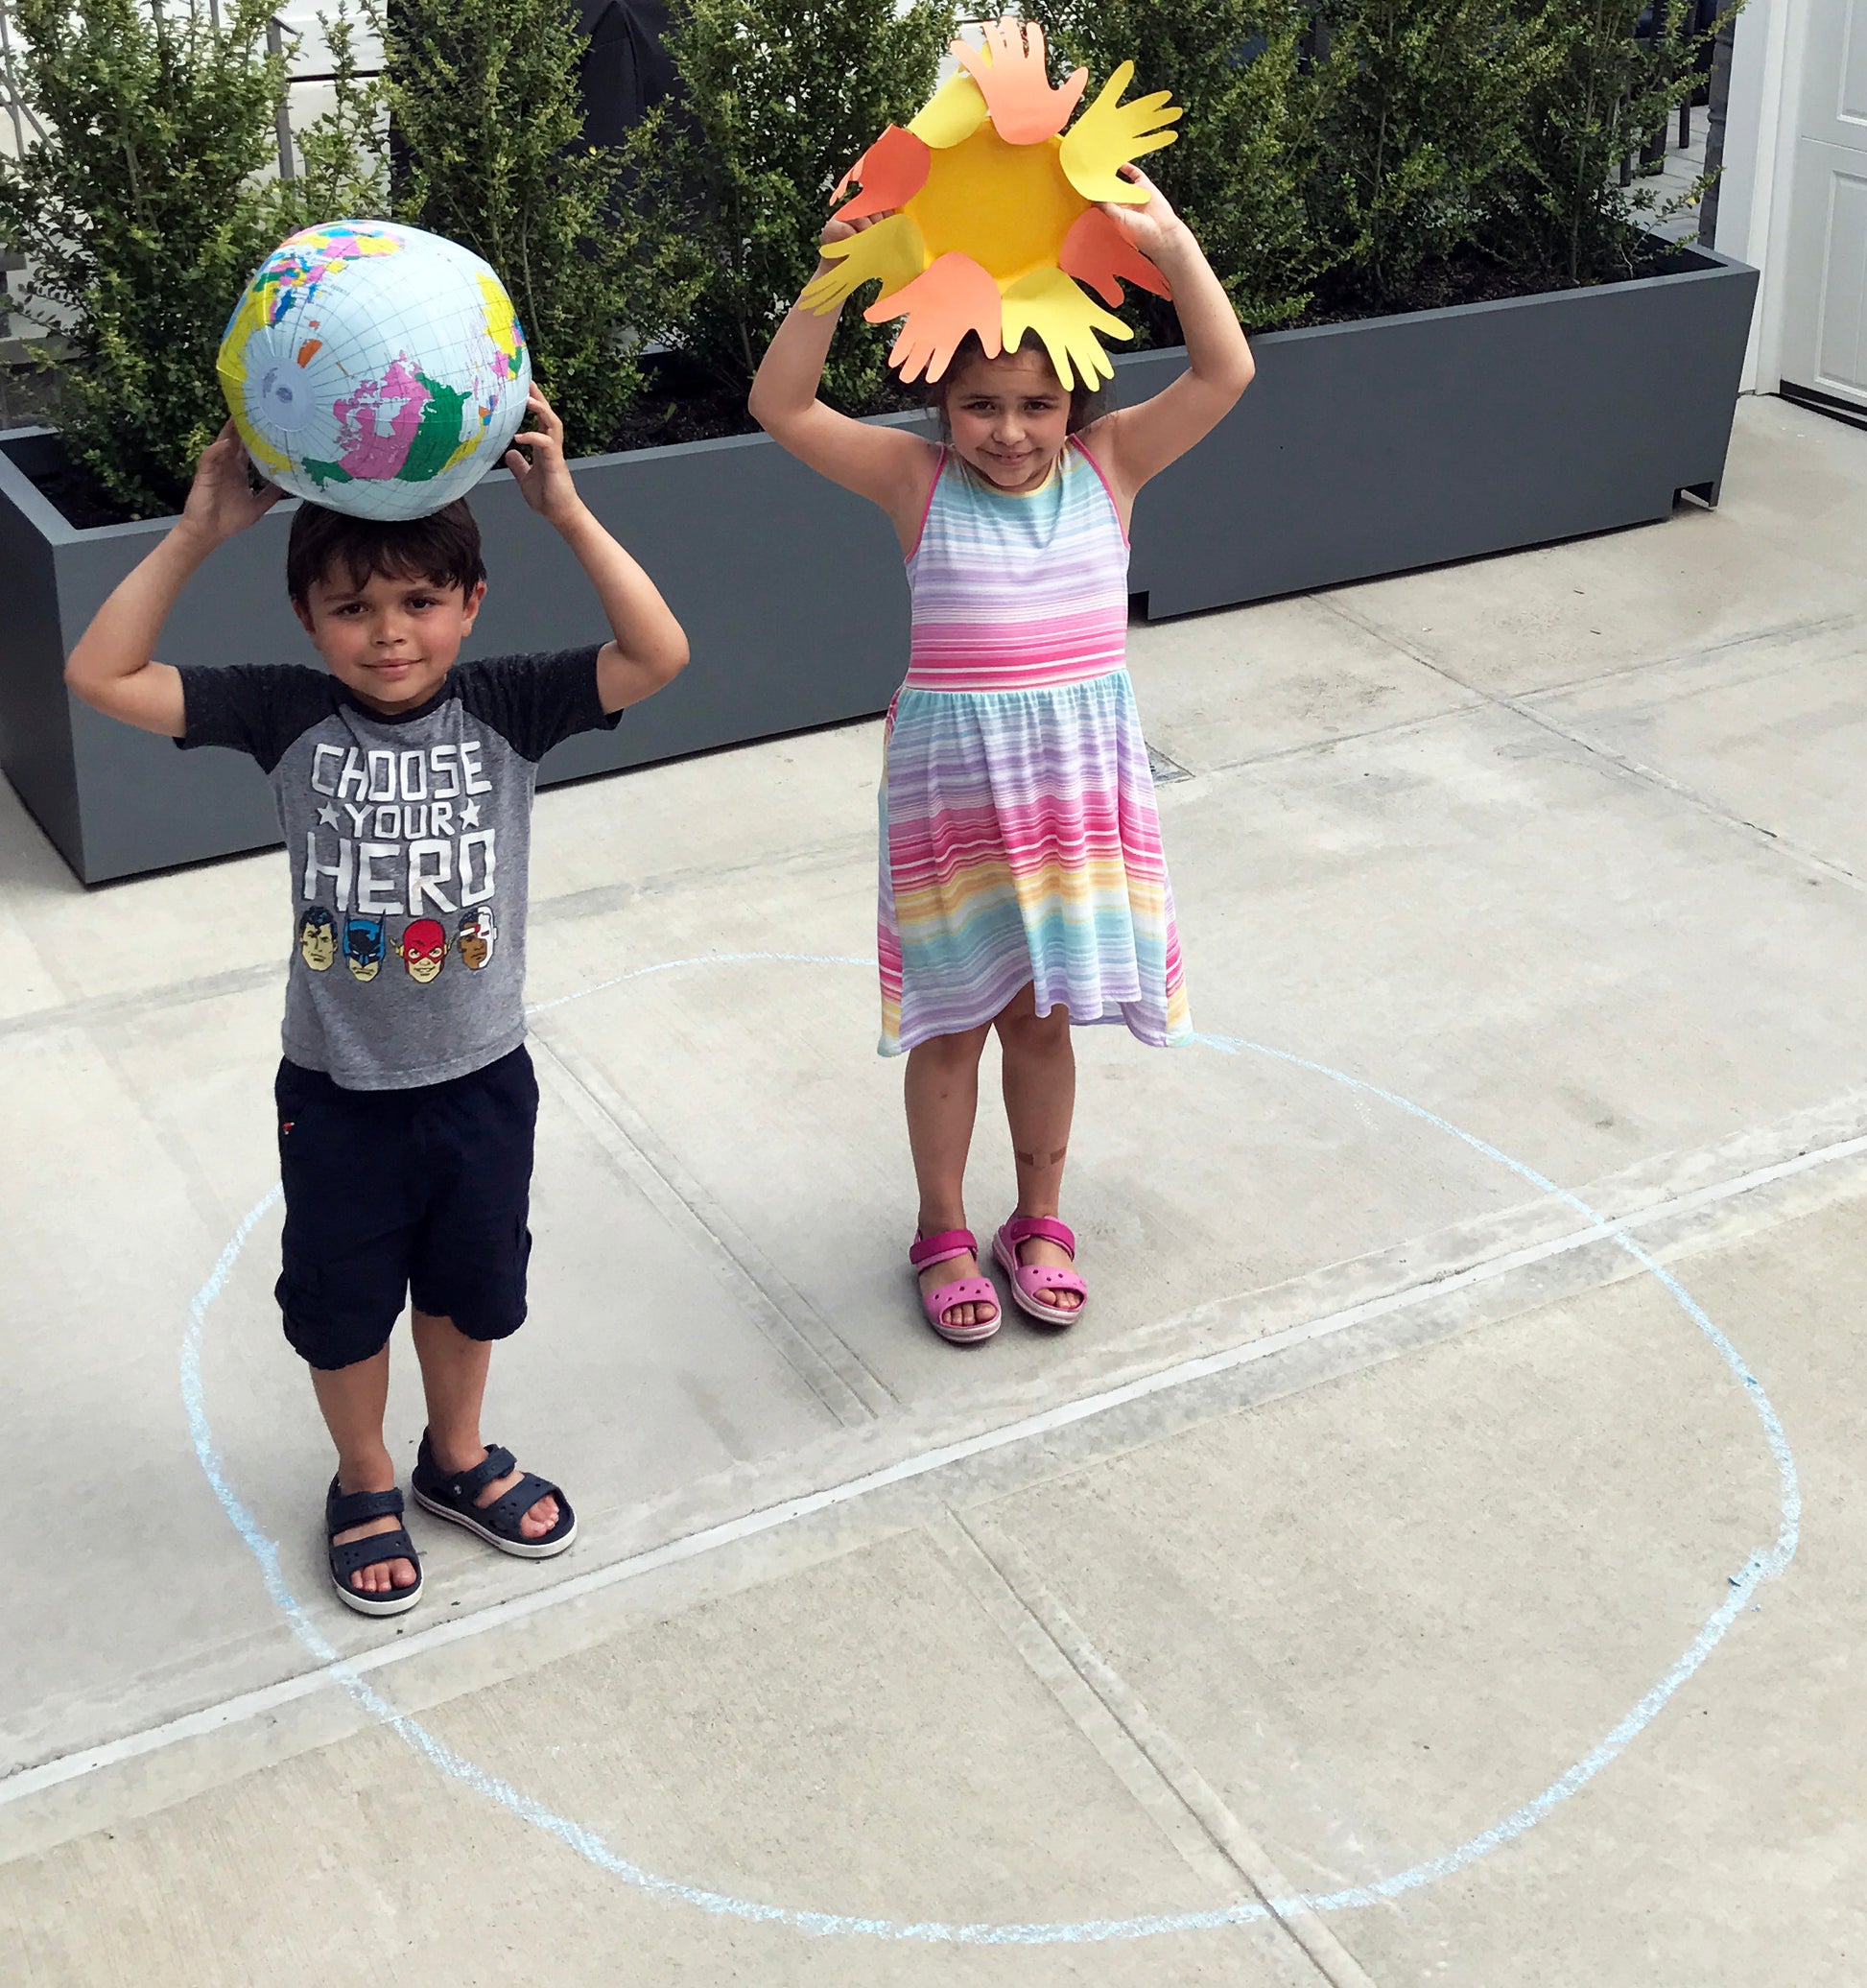 act out the earth's rotation around the sun, earth orbiting the sun activity for kids science